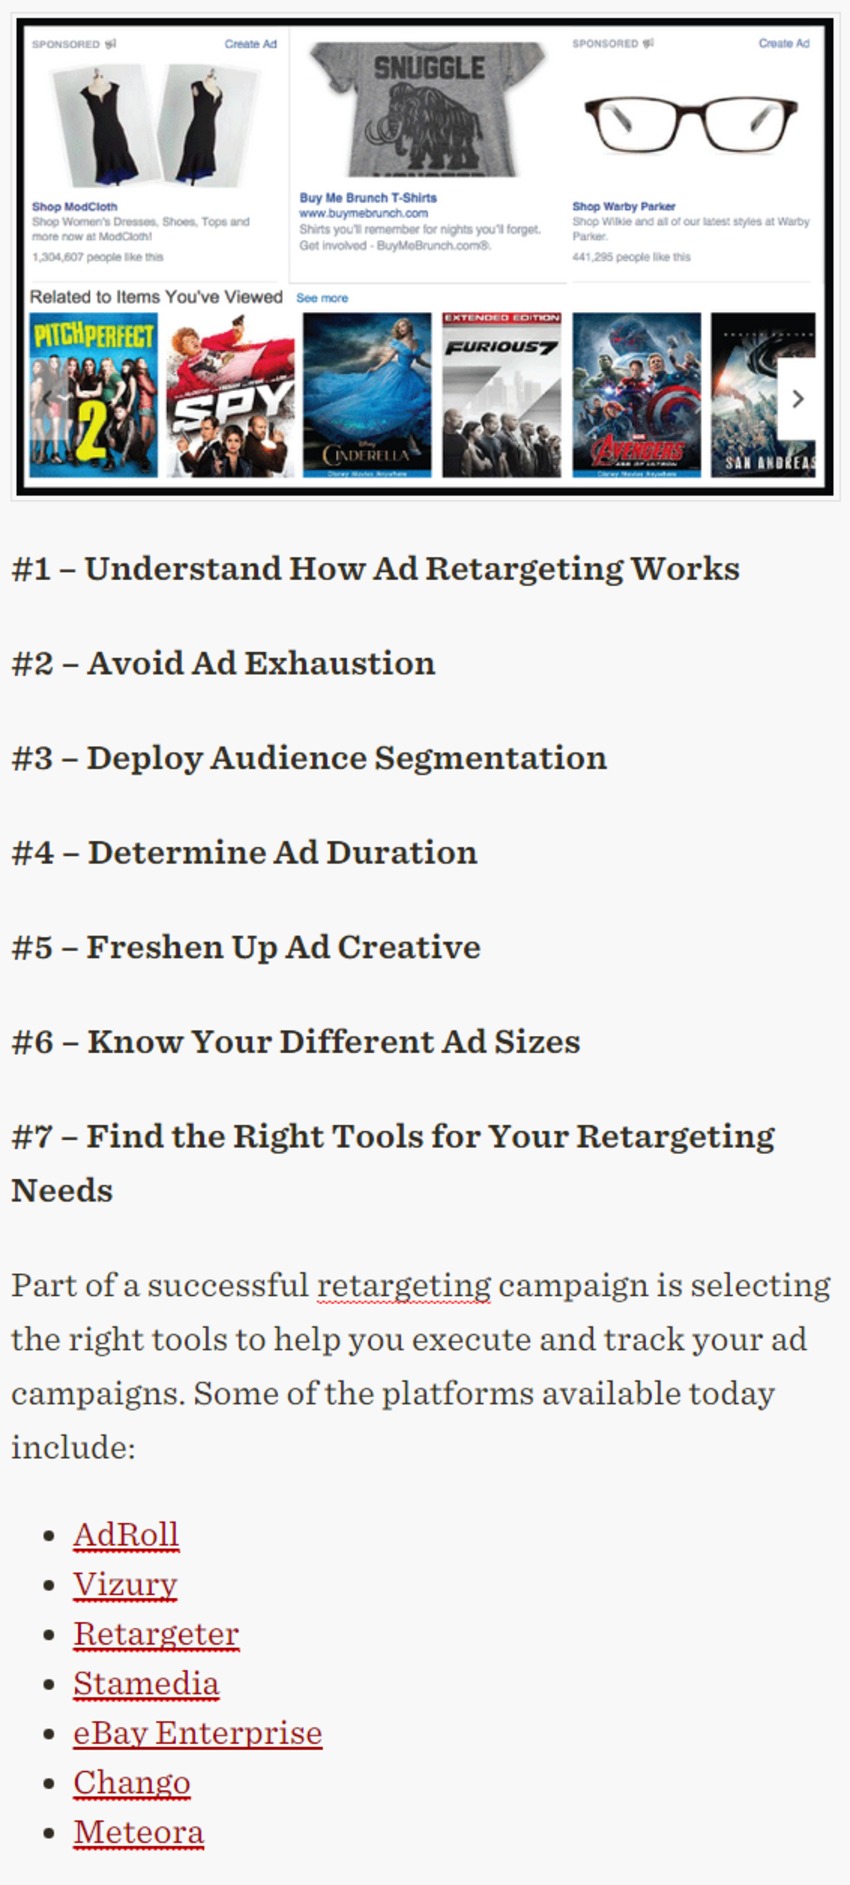 7 Tips For Deploying A Successful Ad Retargeting Strategy - TopRank Blog | The MarTech Digest | Scoop.it